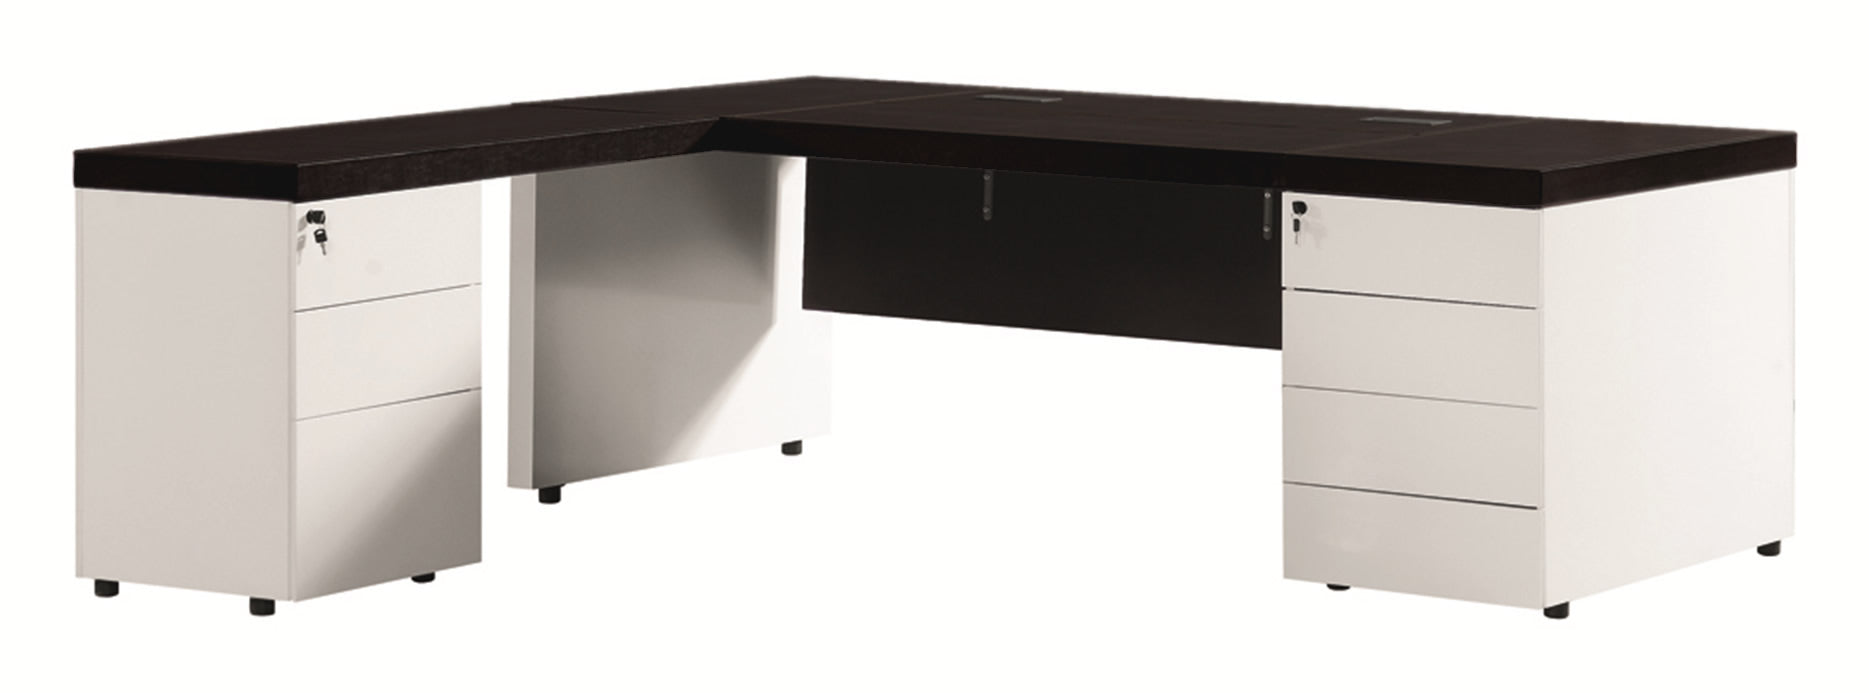 White High Gloss L Shape Executive Desk with Black Bonded Leather Top - T1361-2000mm Huddersfield